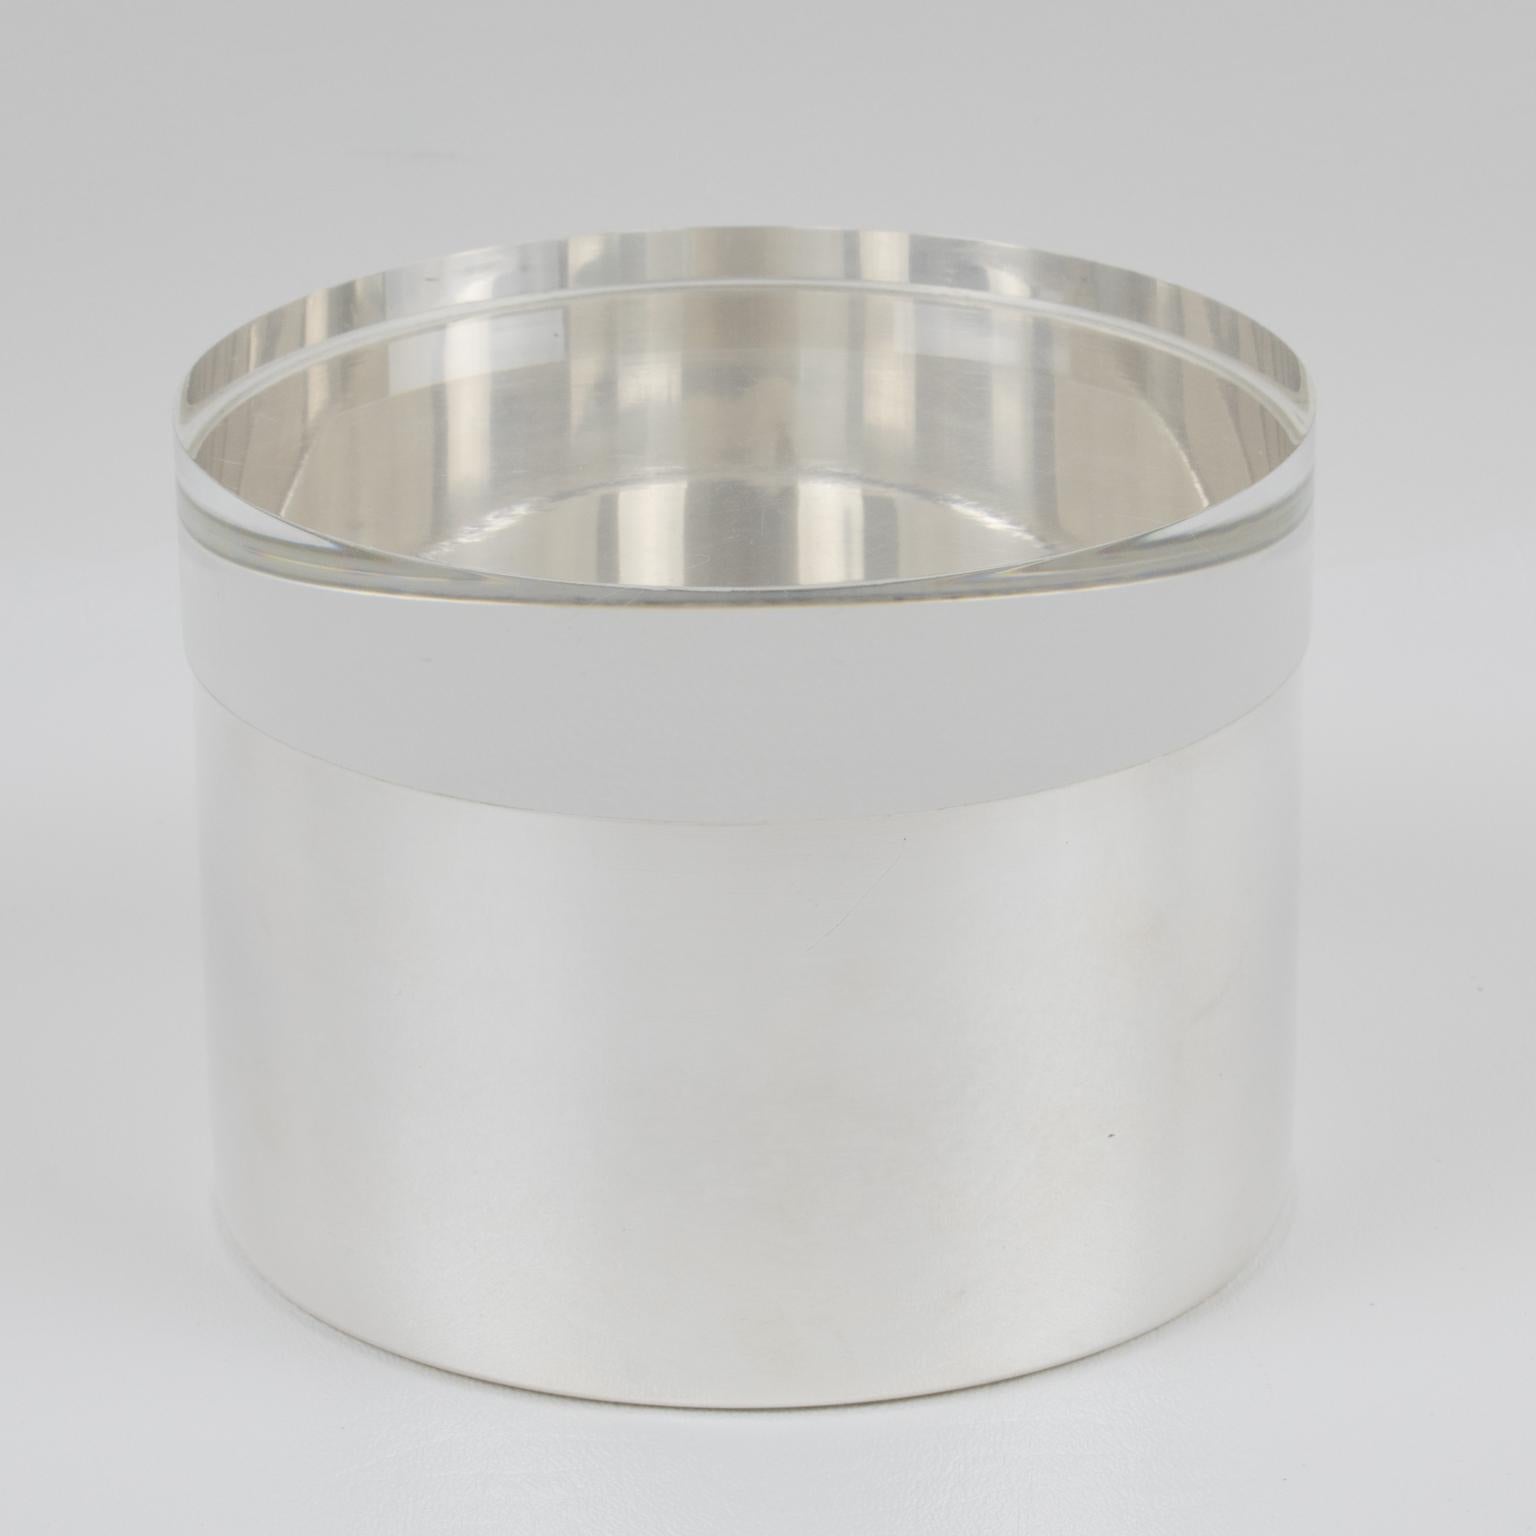 Mid-Century Modern Silver Plate and Lucite Round Box by Debladis, Paris For Sale